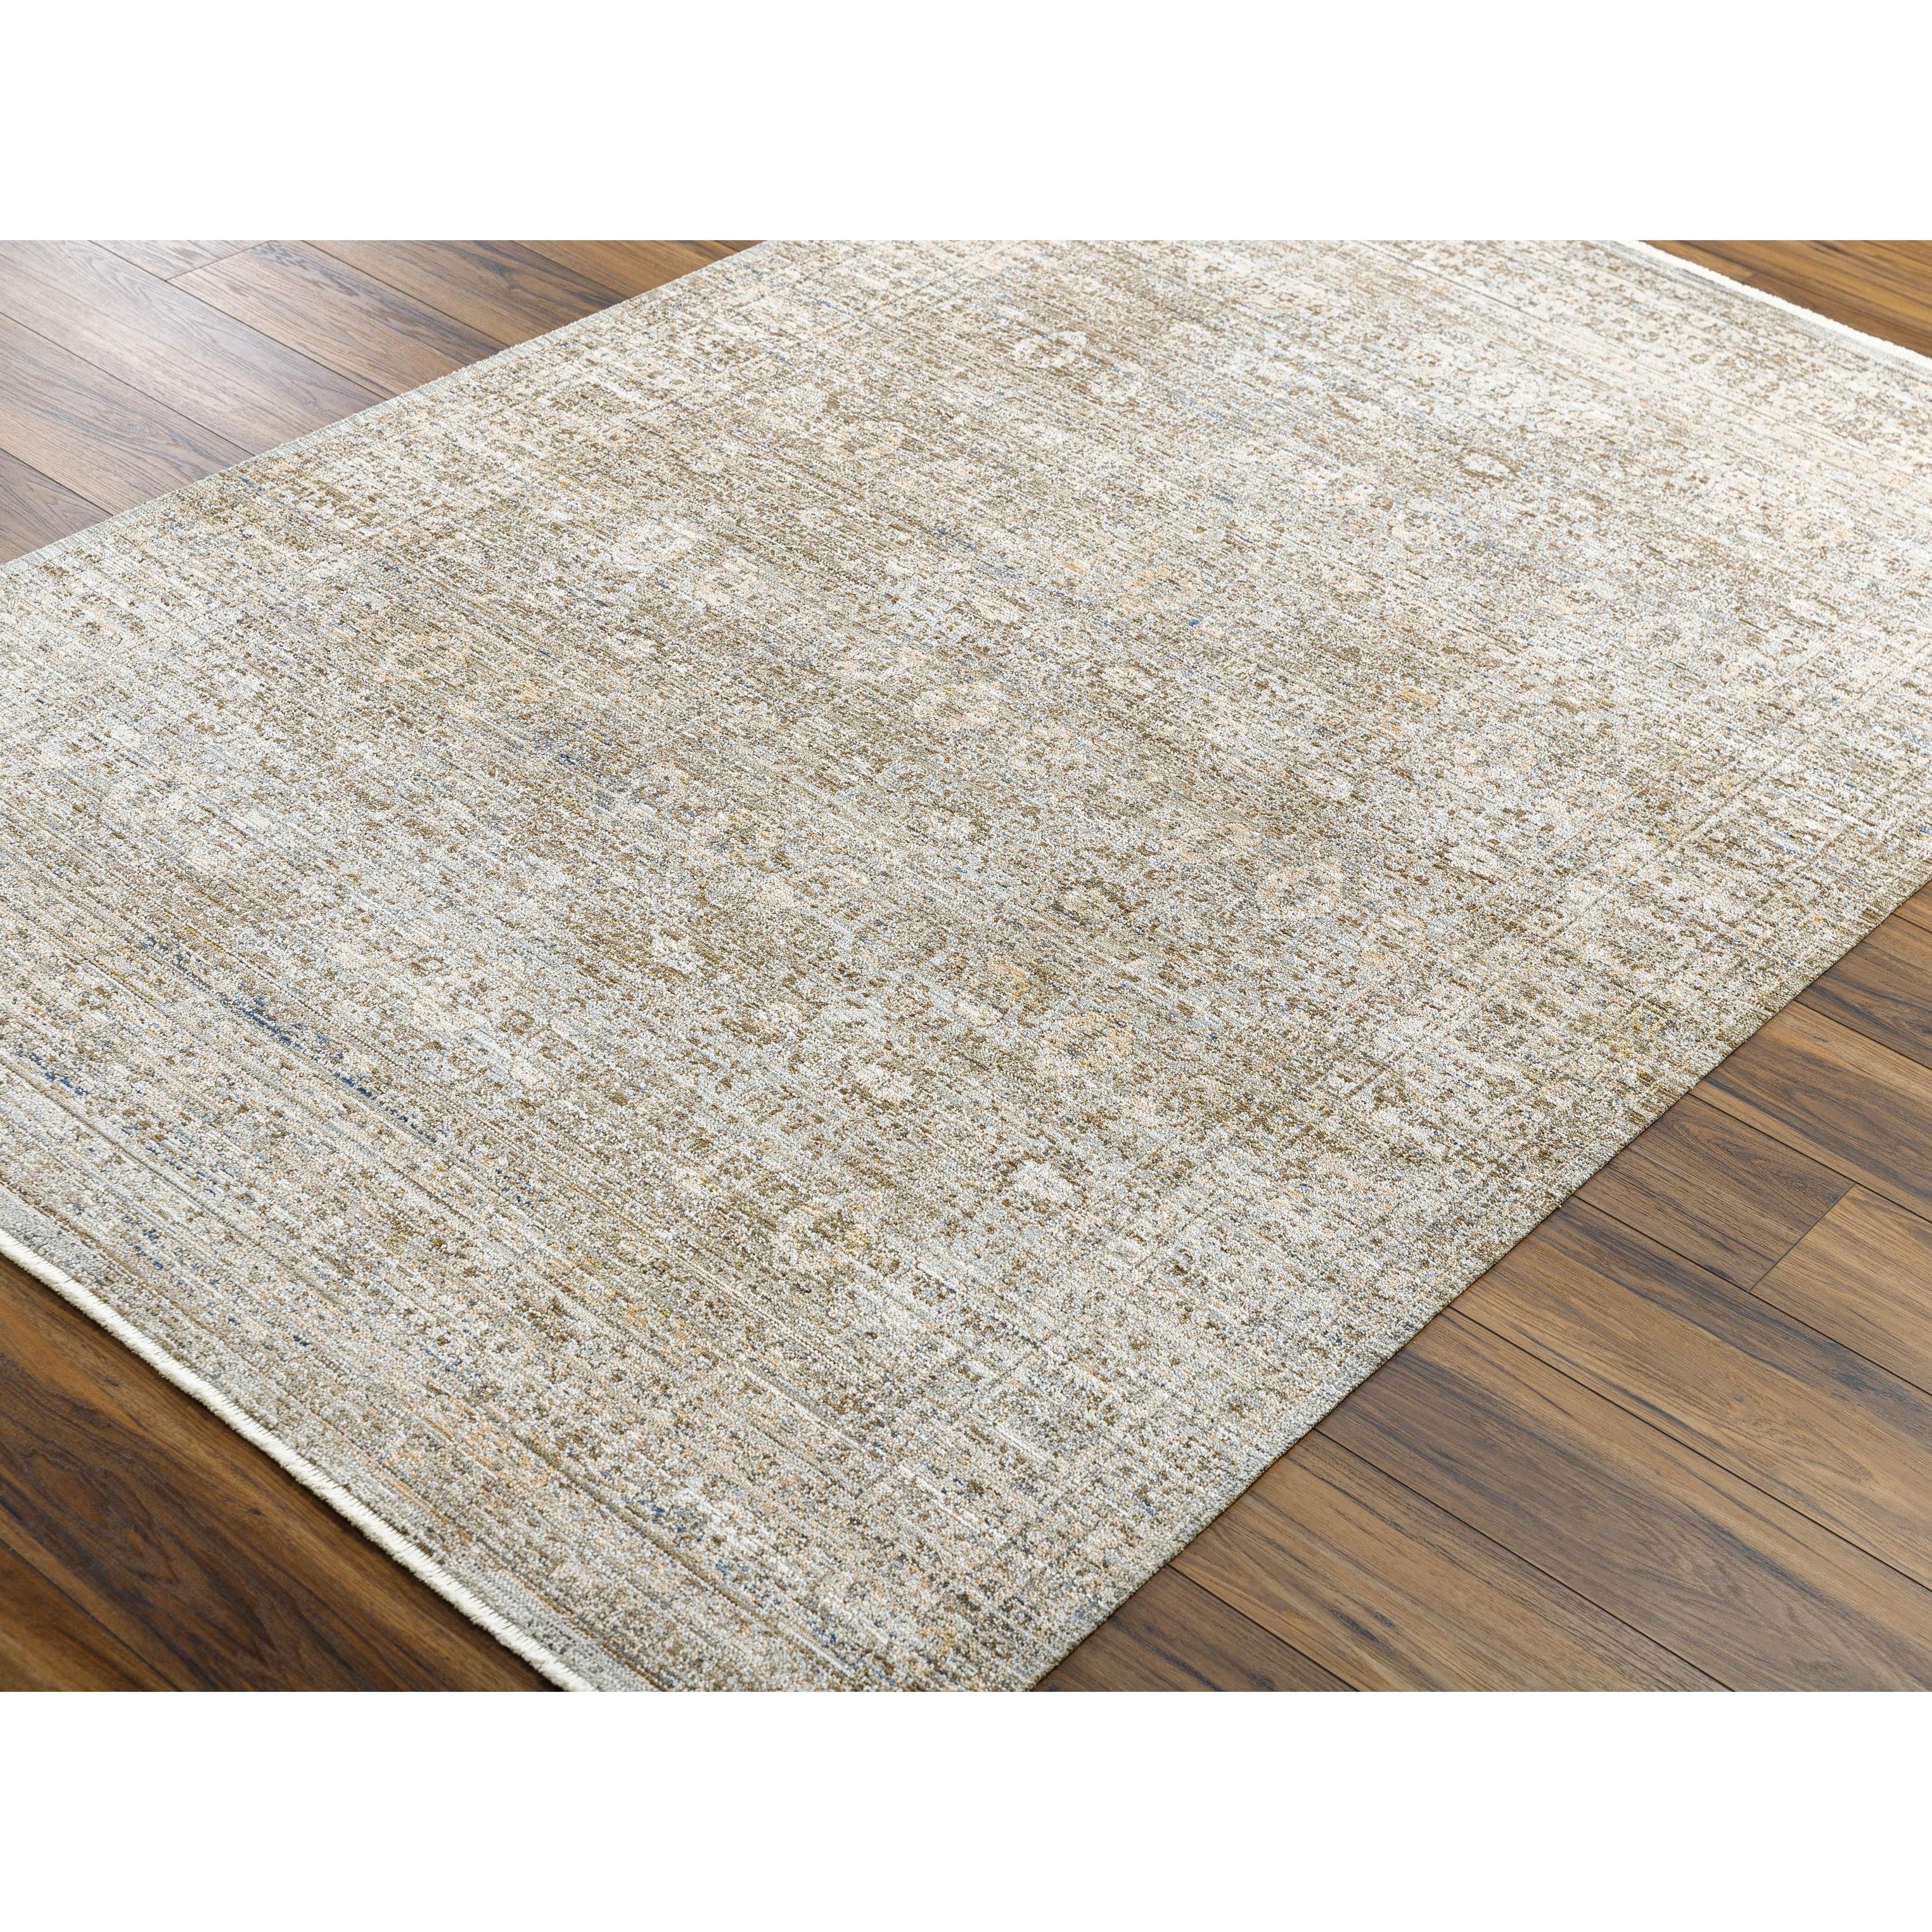 Introducing the Margaret area rug, a stunning collaboration between Surya and Becki Owens! This unique piece is sure to bring a touch of elegance to any room. Amethyst Home provides interior design, new home construction design consulting, vintage area rugs, and lighting in the Dallas metro area.